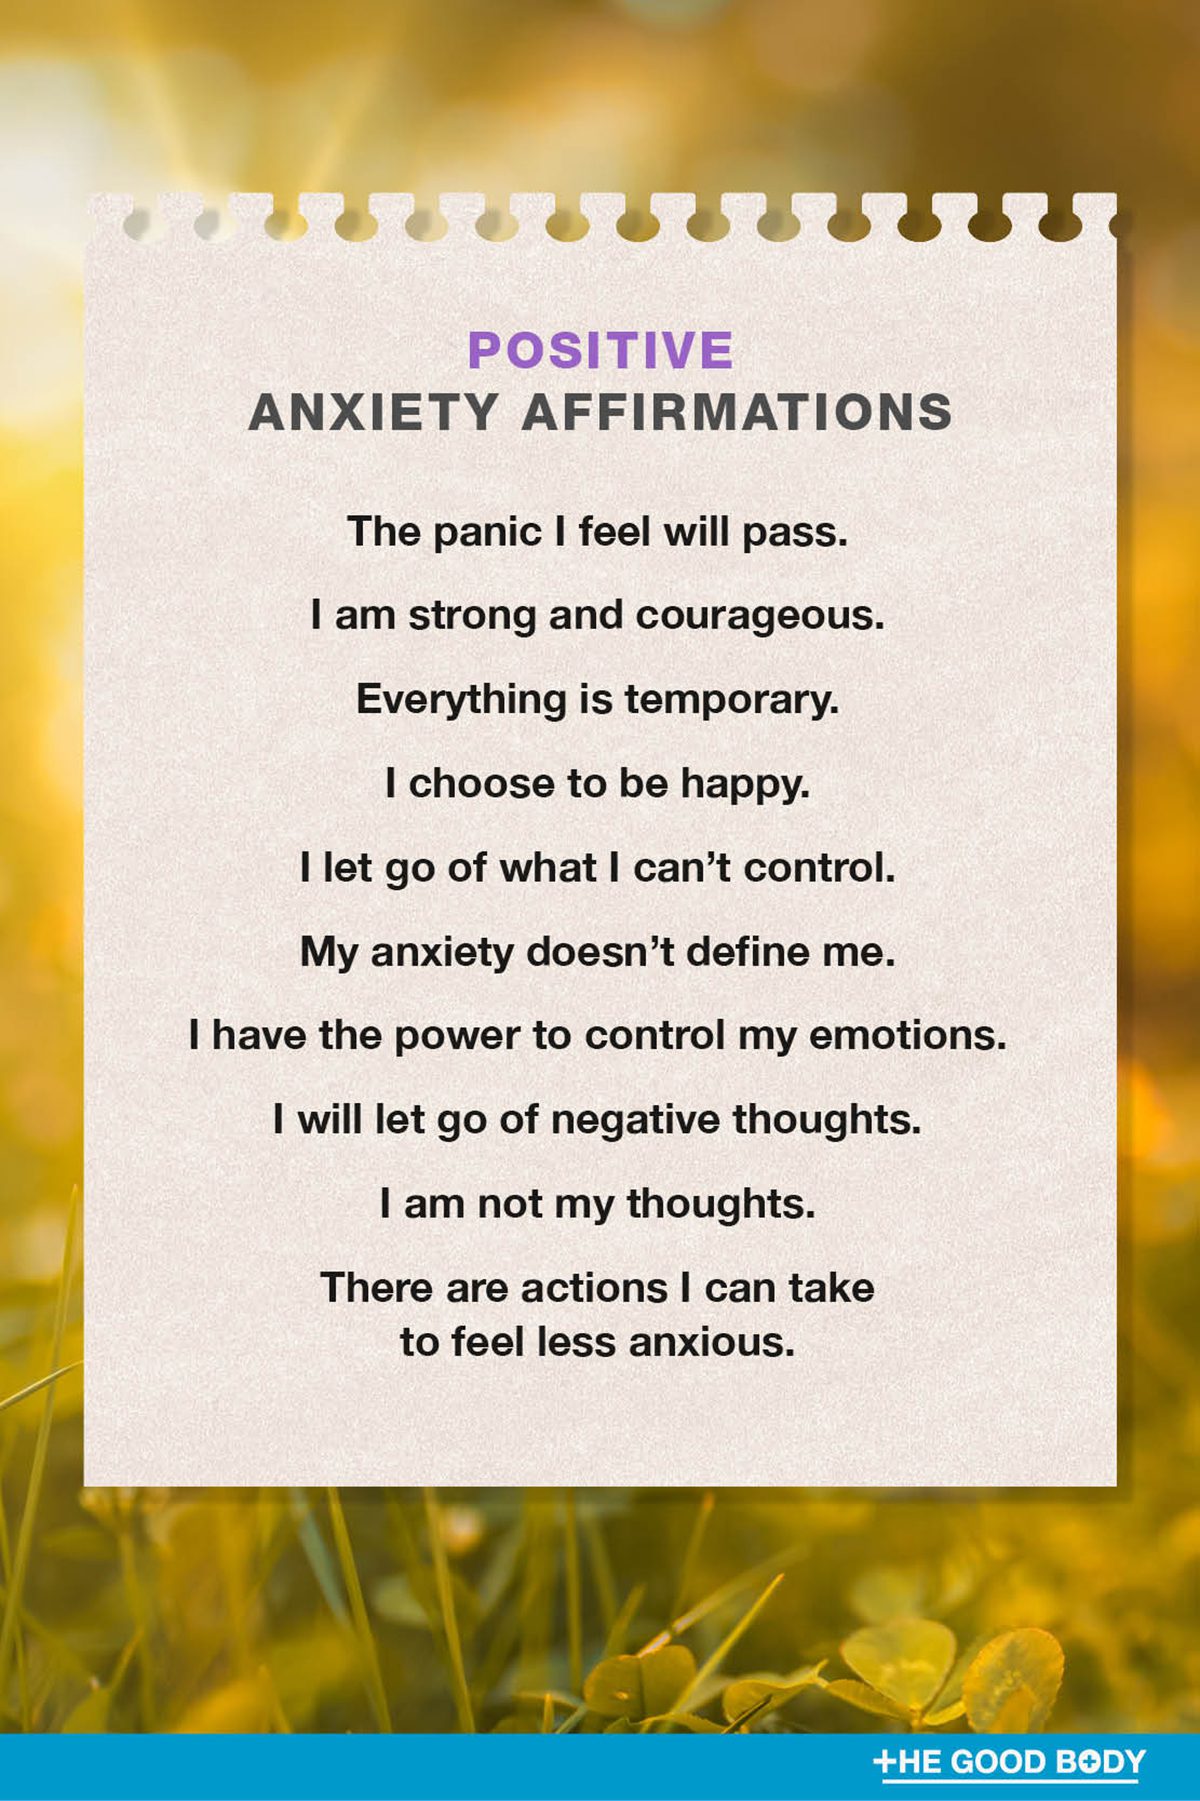 10 Positive Anxiety Affirmations on Textured Note Paper Set Against Grass and Sun Background